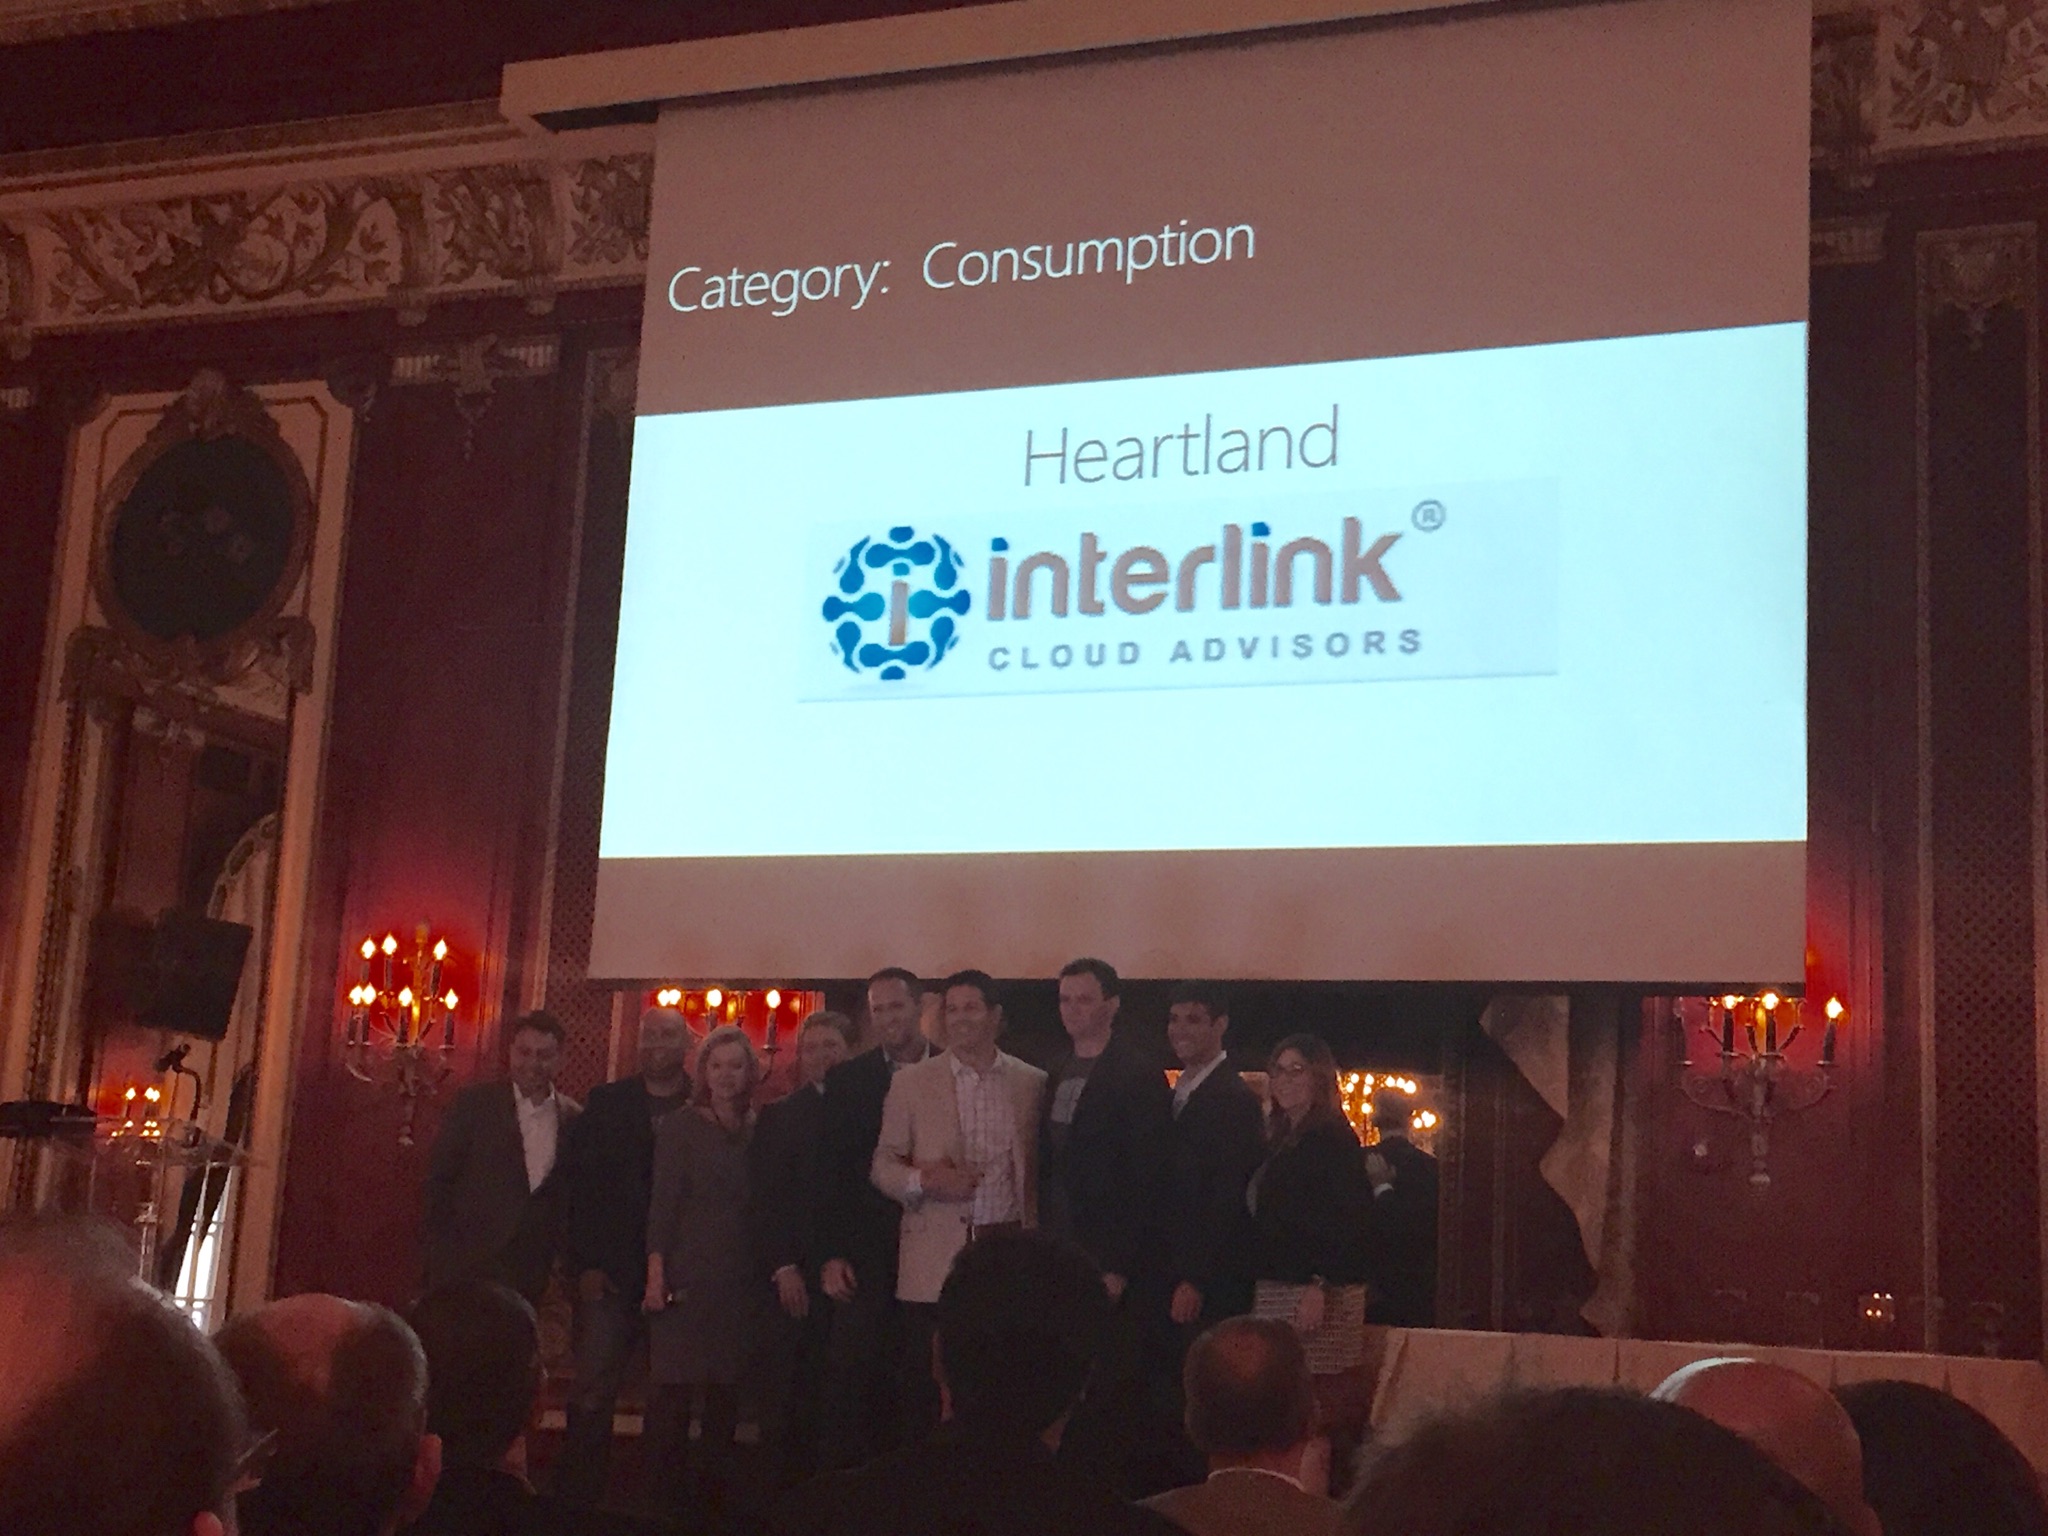 Microsoft Awards Interlink Cloud Advisors For Top Consumption Use of Office 365